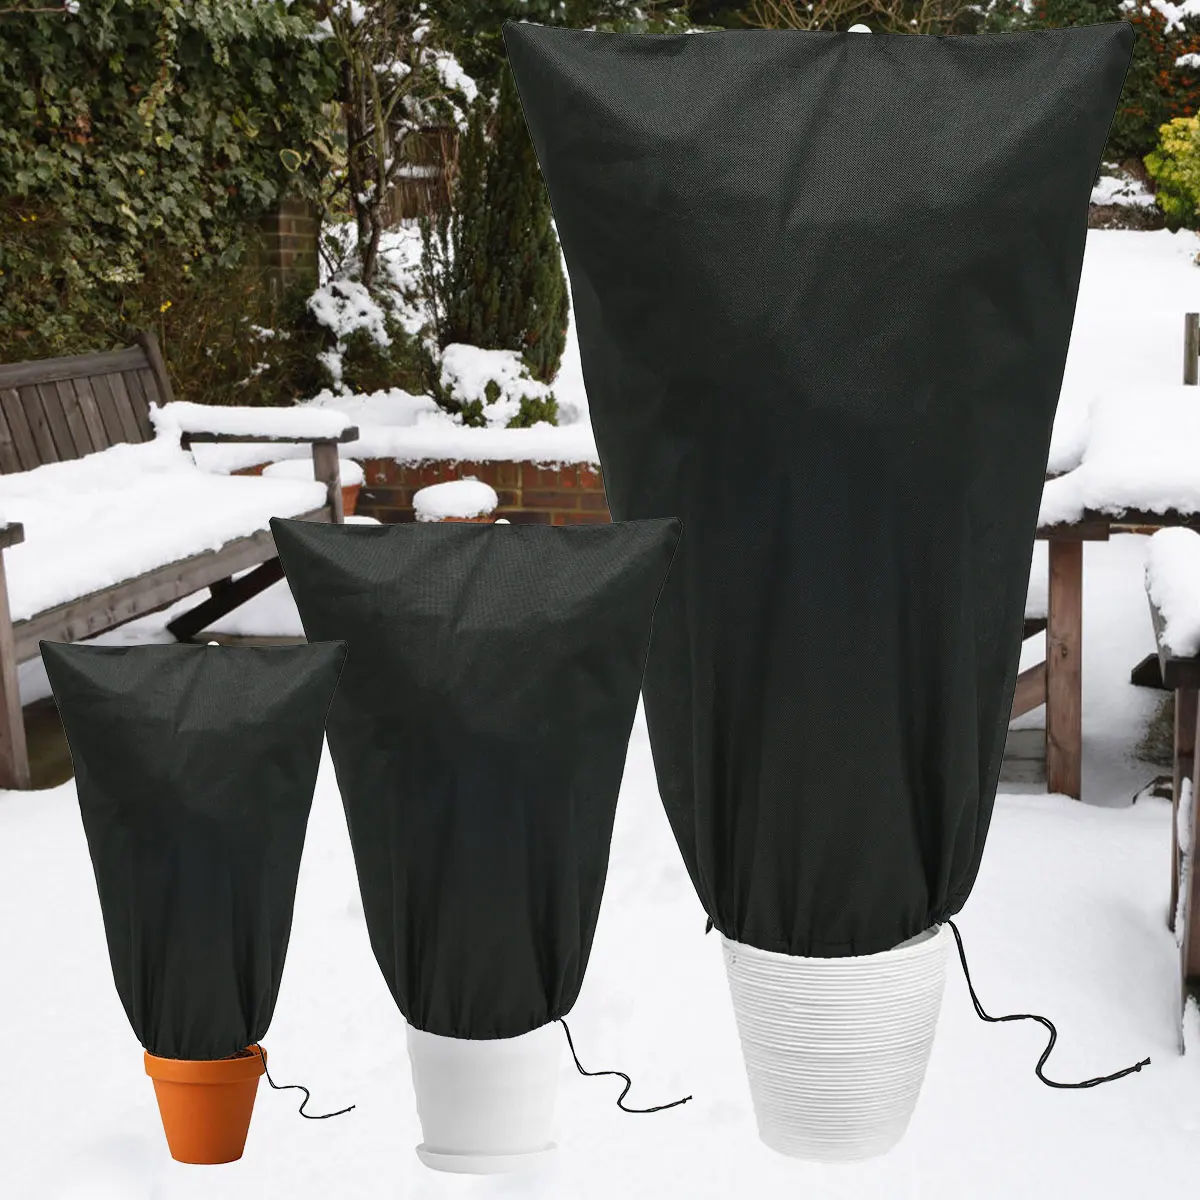 2PCS Plant Cover Tree Winter Cover Shrub Plant Warm Protecting Bag Frost Protection for Yard Garden Plants Small Tree VFD Bags